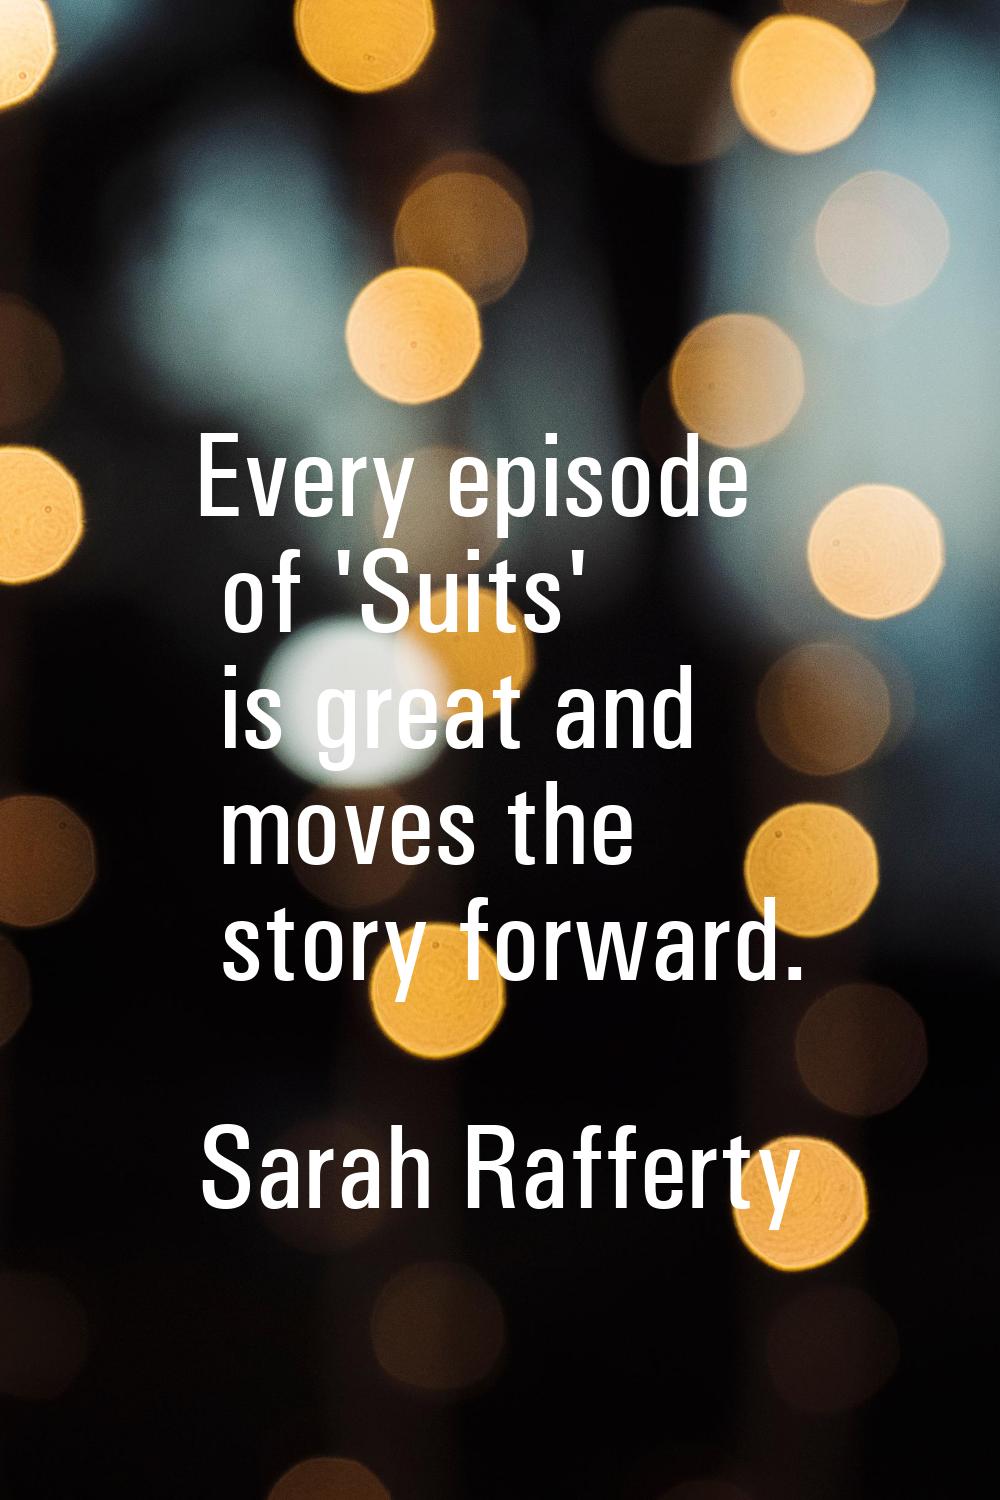 Every episode of 'Suits' is great and moves the story forward.